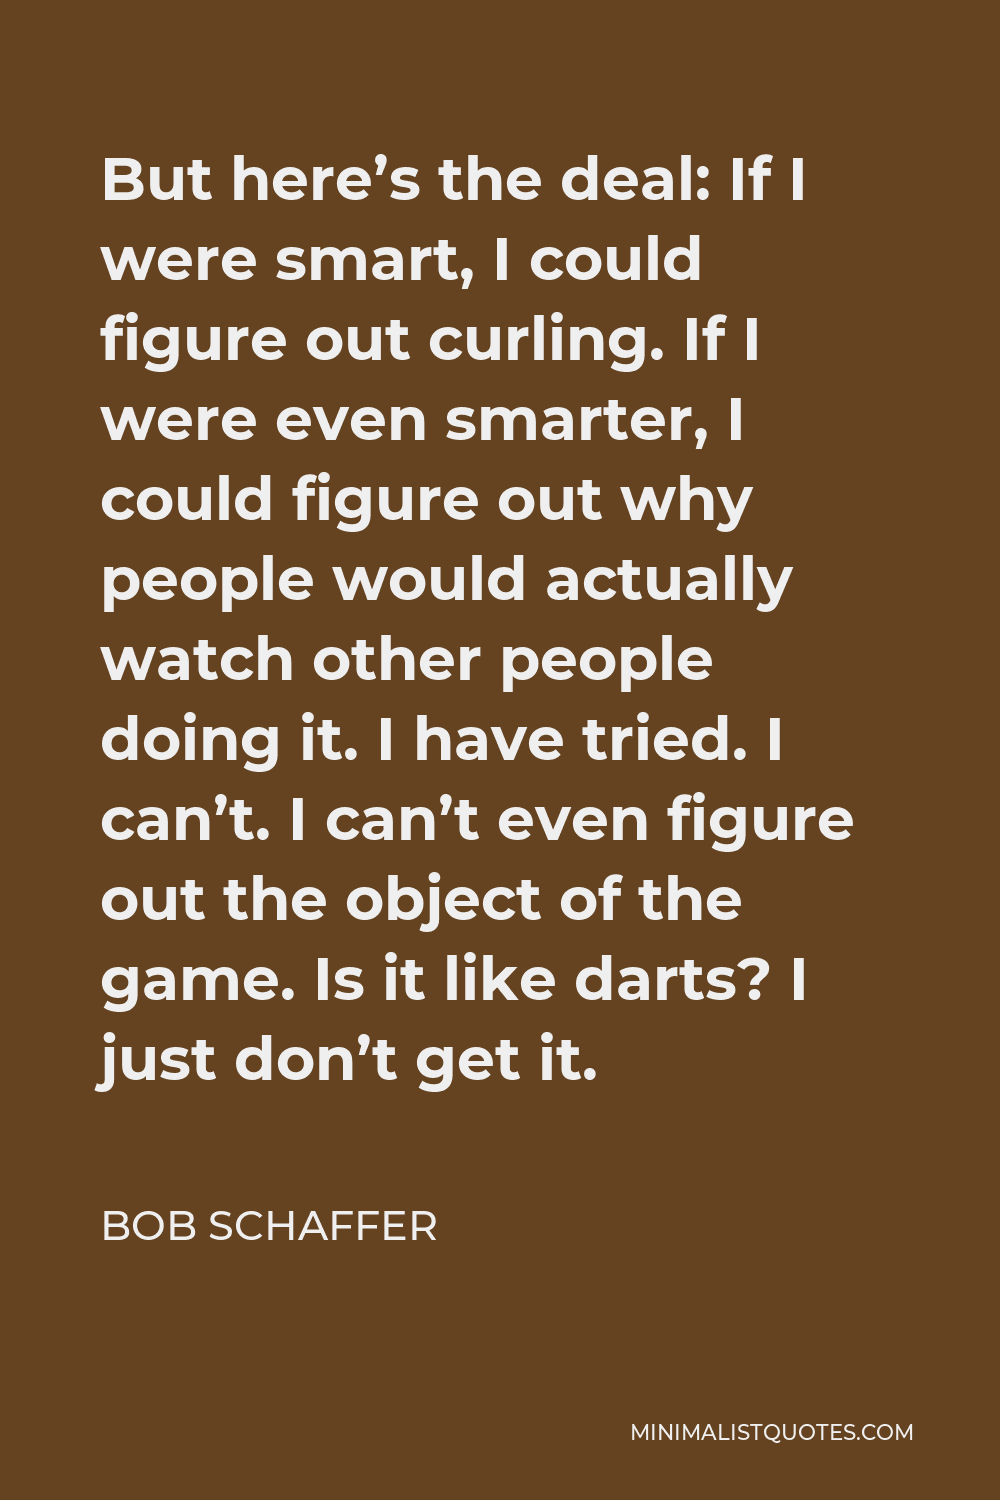 Bob Schaffer Quote - But here’s the deal: If I were smart, I could figure out curling. If I were even smarter, I could figure out why people would actually watch other people doing it. I have tried. I can’t. I can’t even figure out the object of the game. Is it like darts? I just don’t get it.